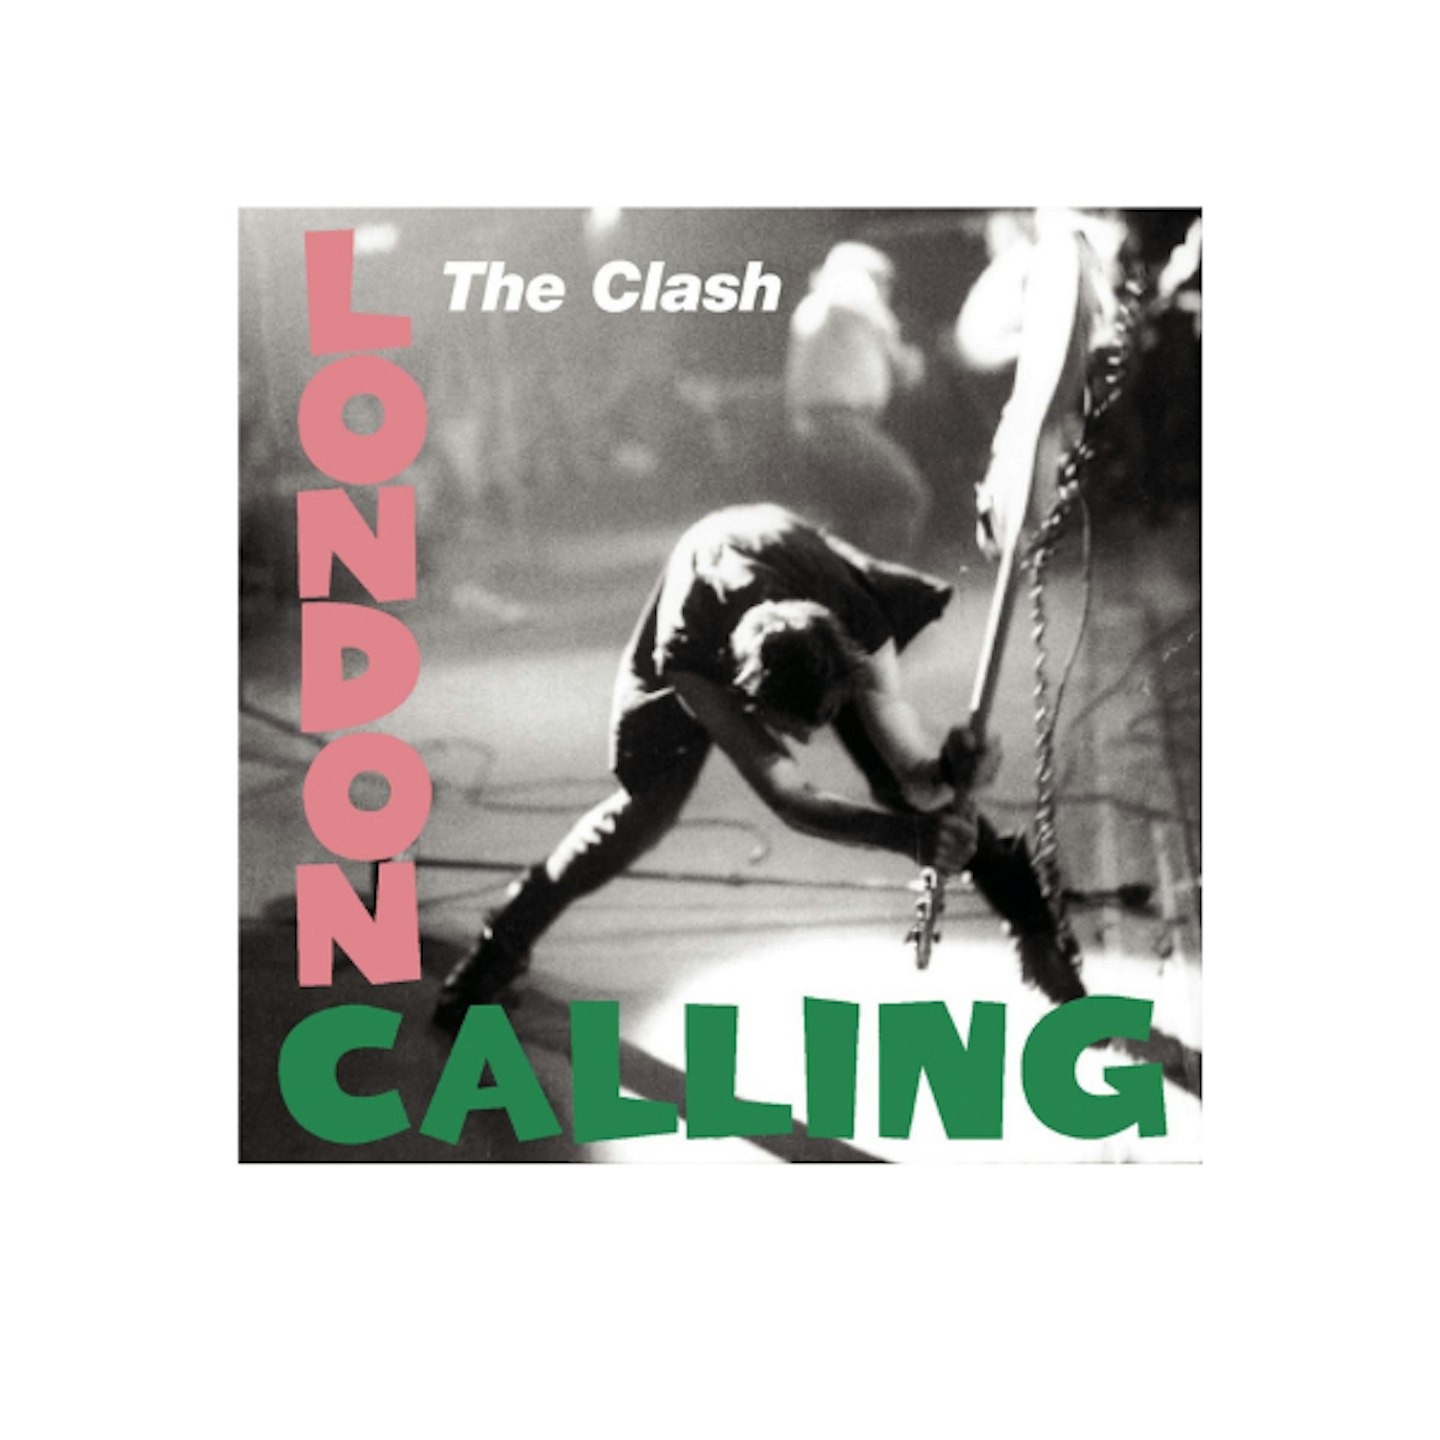 The Clash - London's Calling